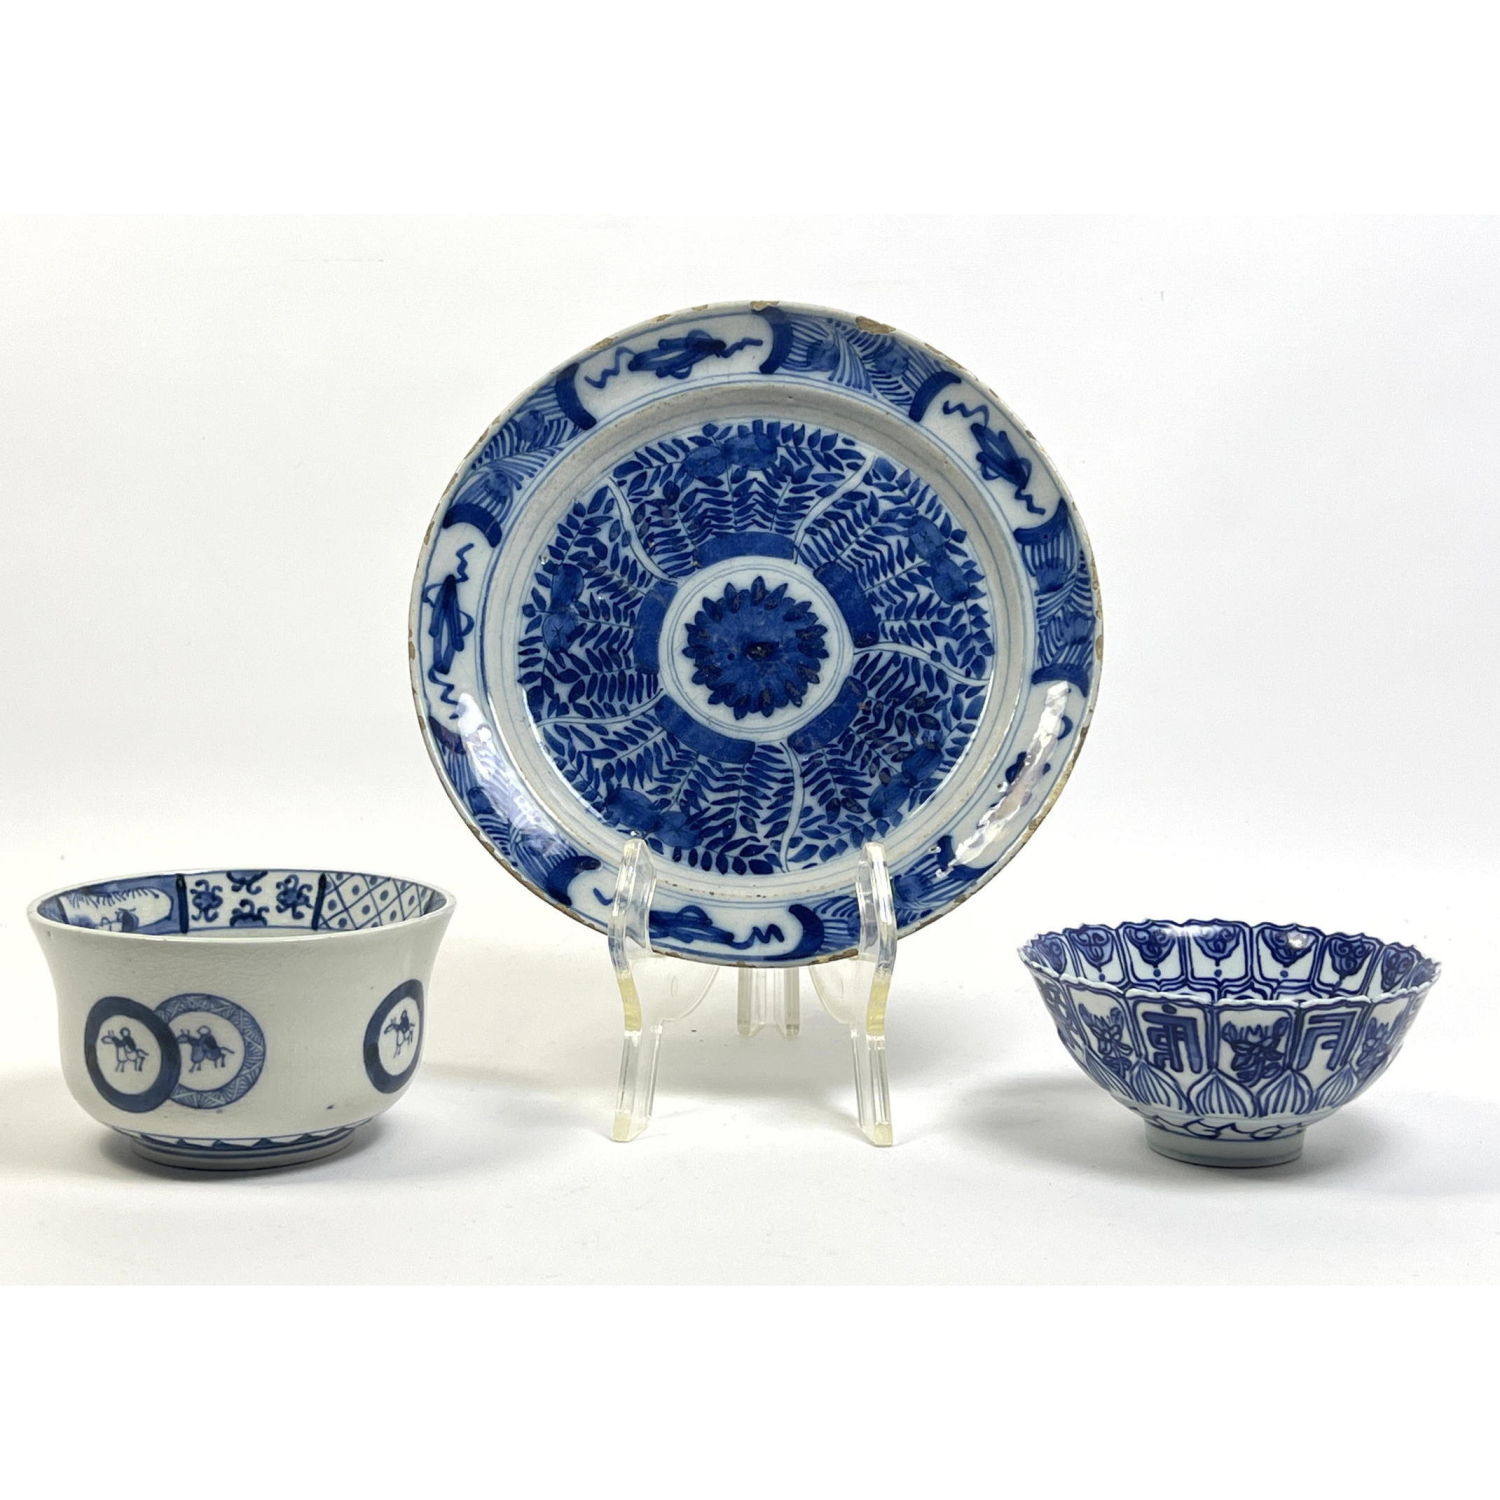 3pcs Chinese Blue and White Tablewares.